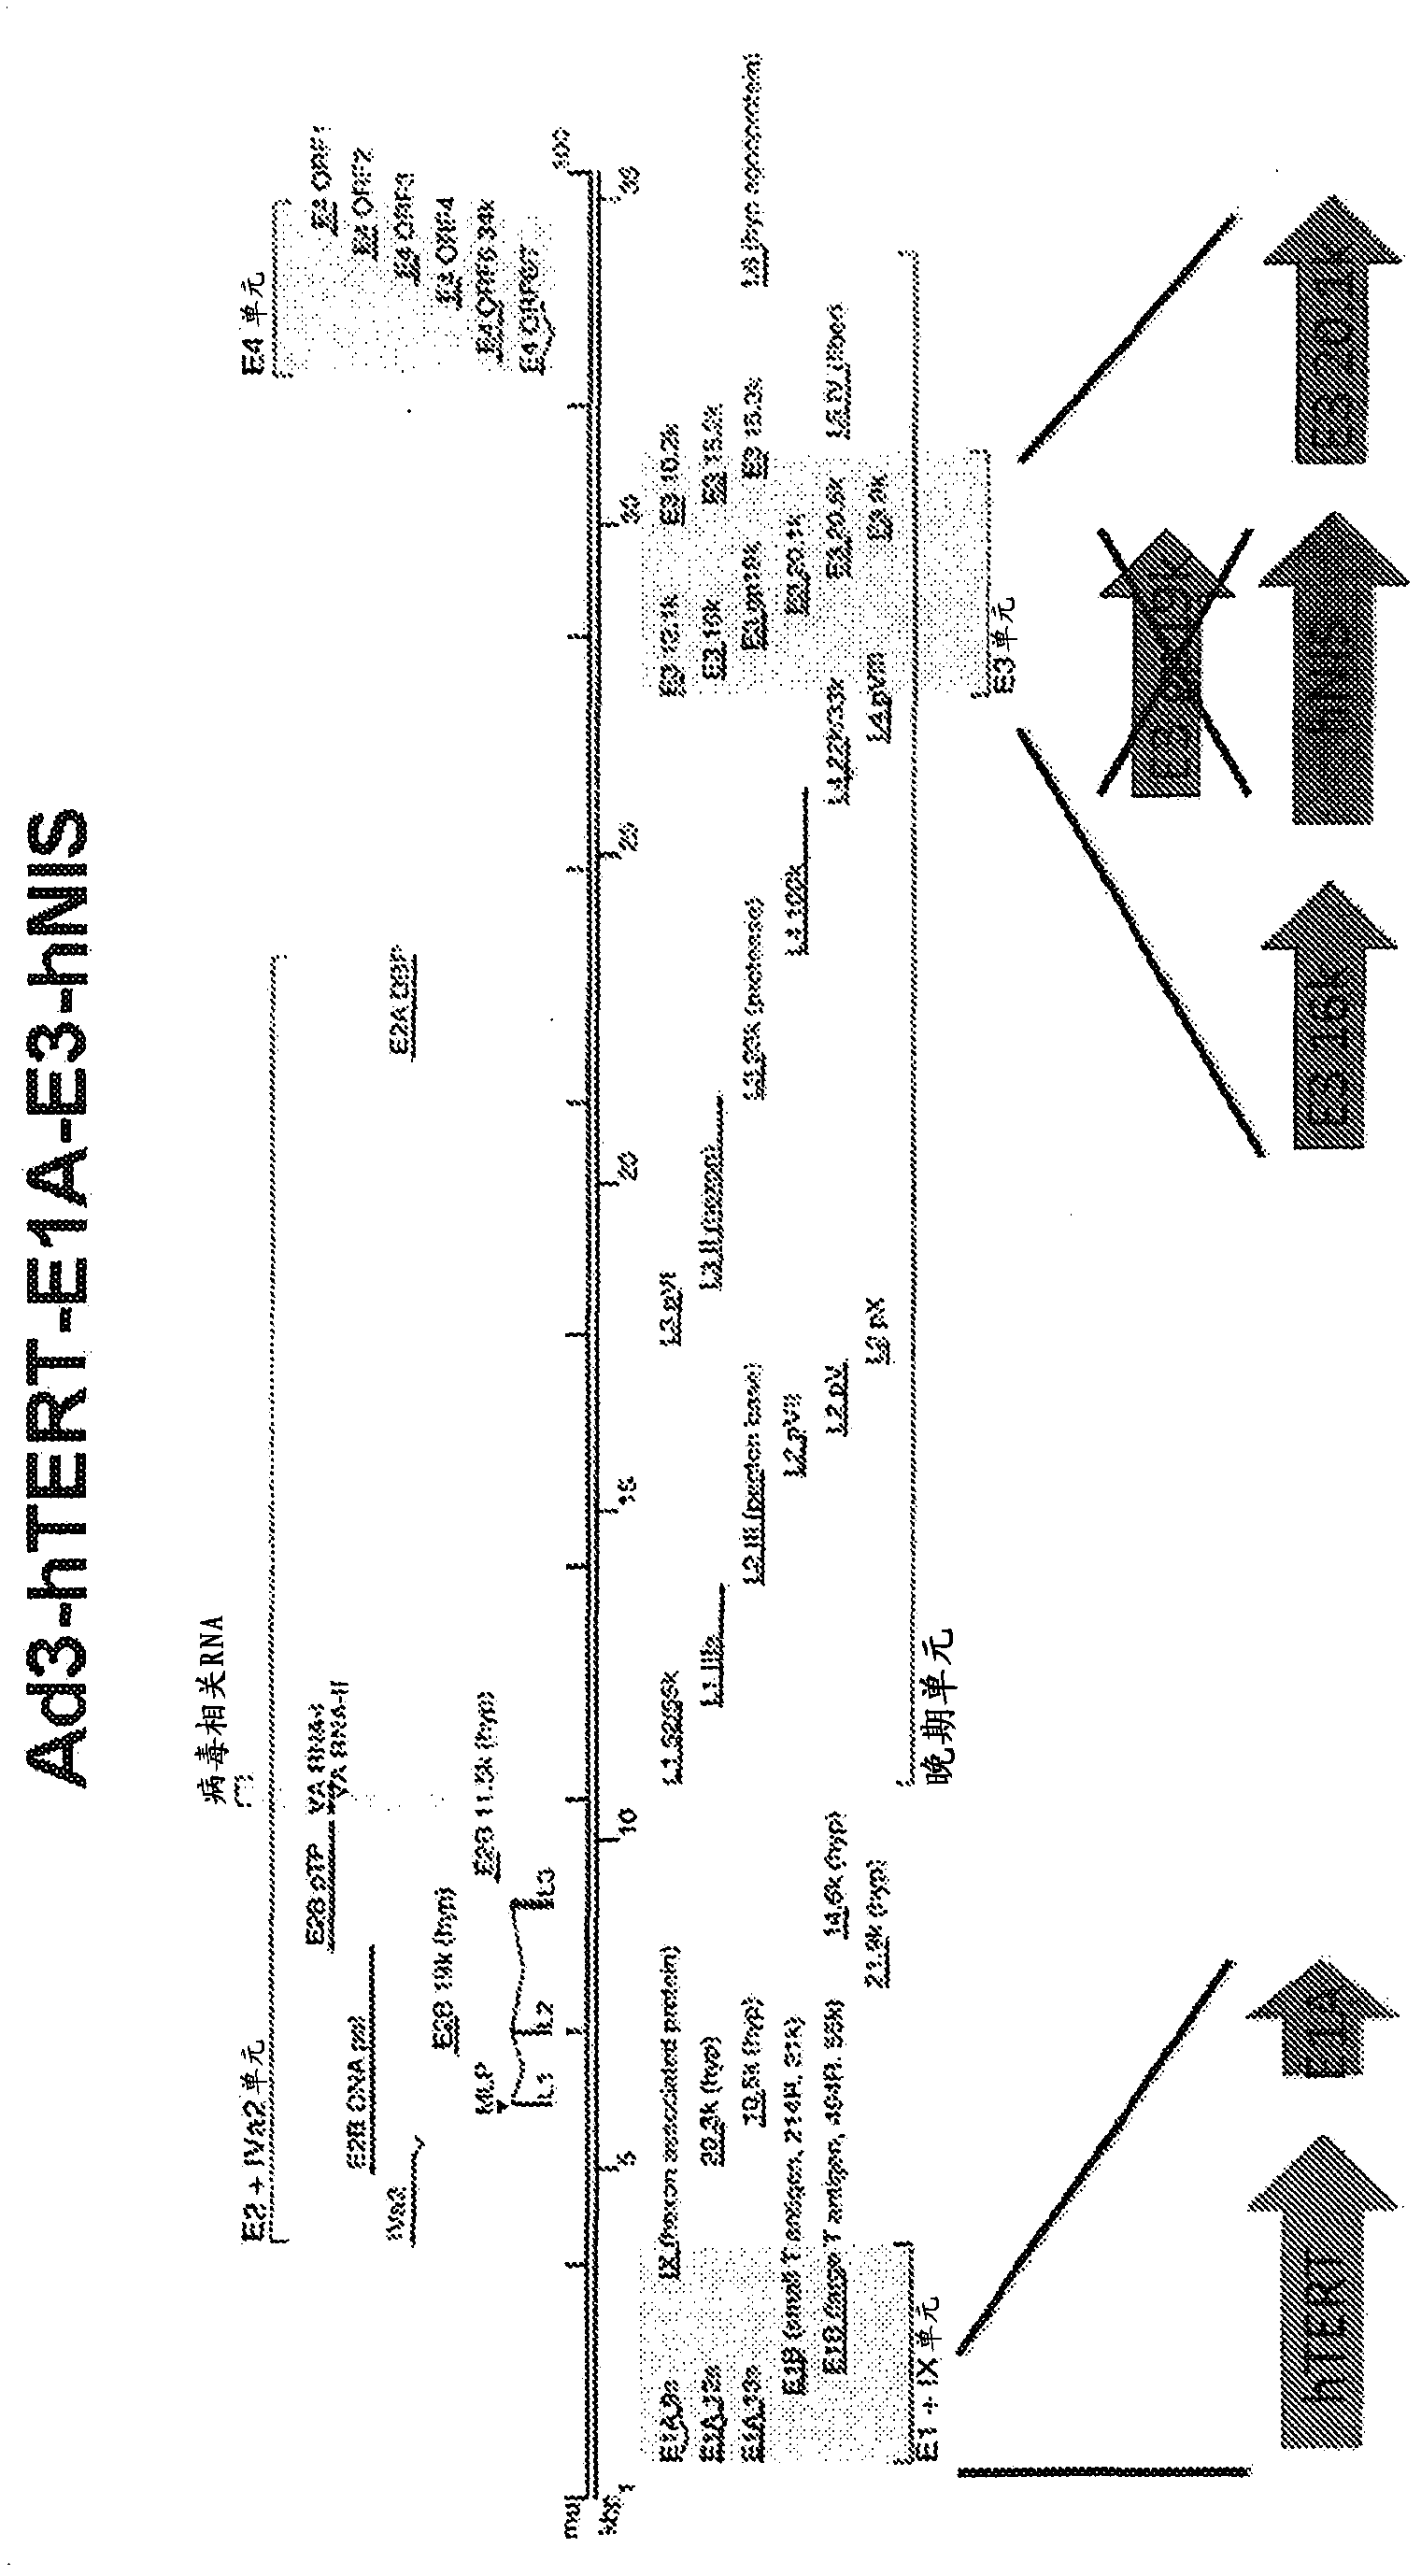 Non-ad5 adenoviral vectors and methods and uses related thereto